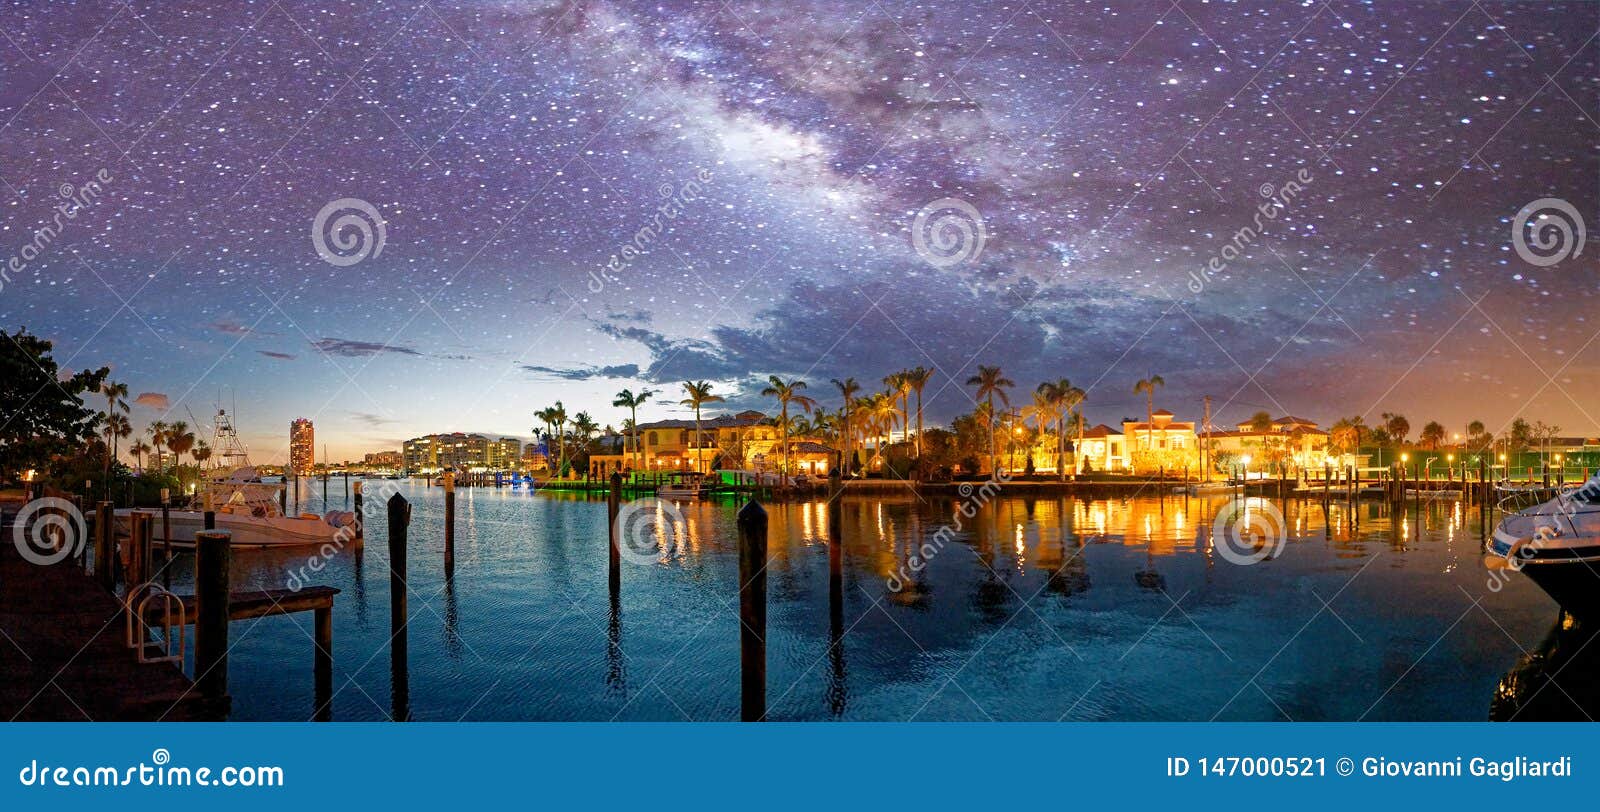 boca raton skyline and reflections on a starry night, florida